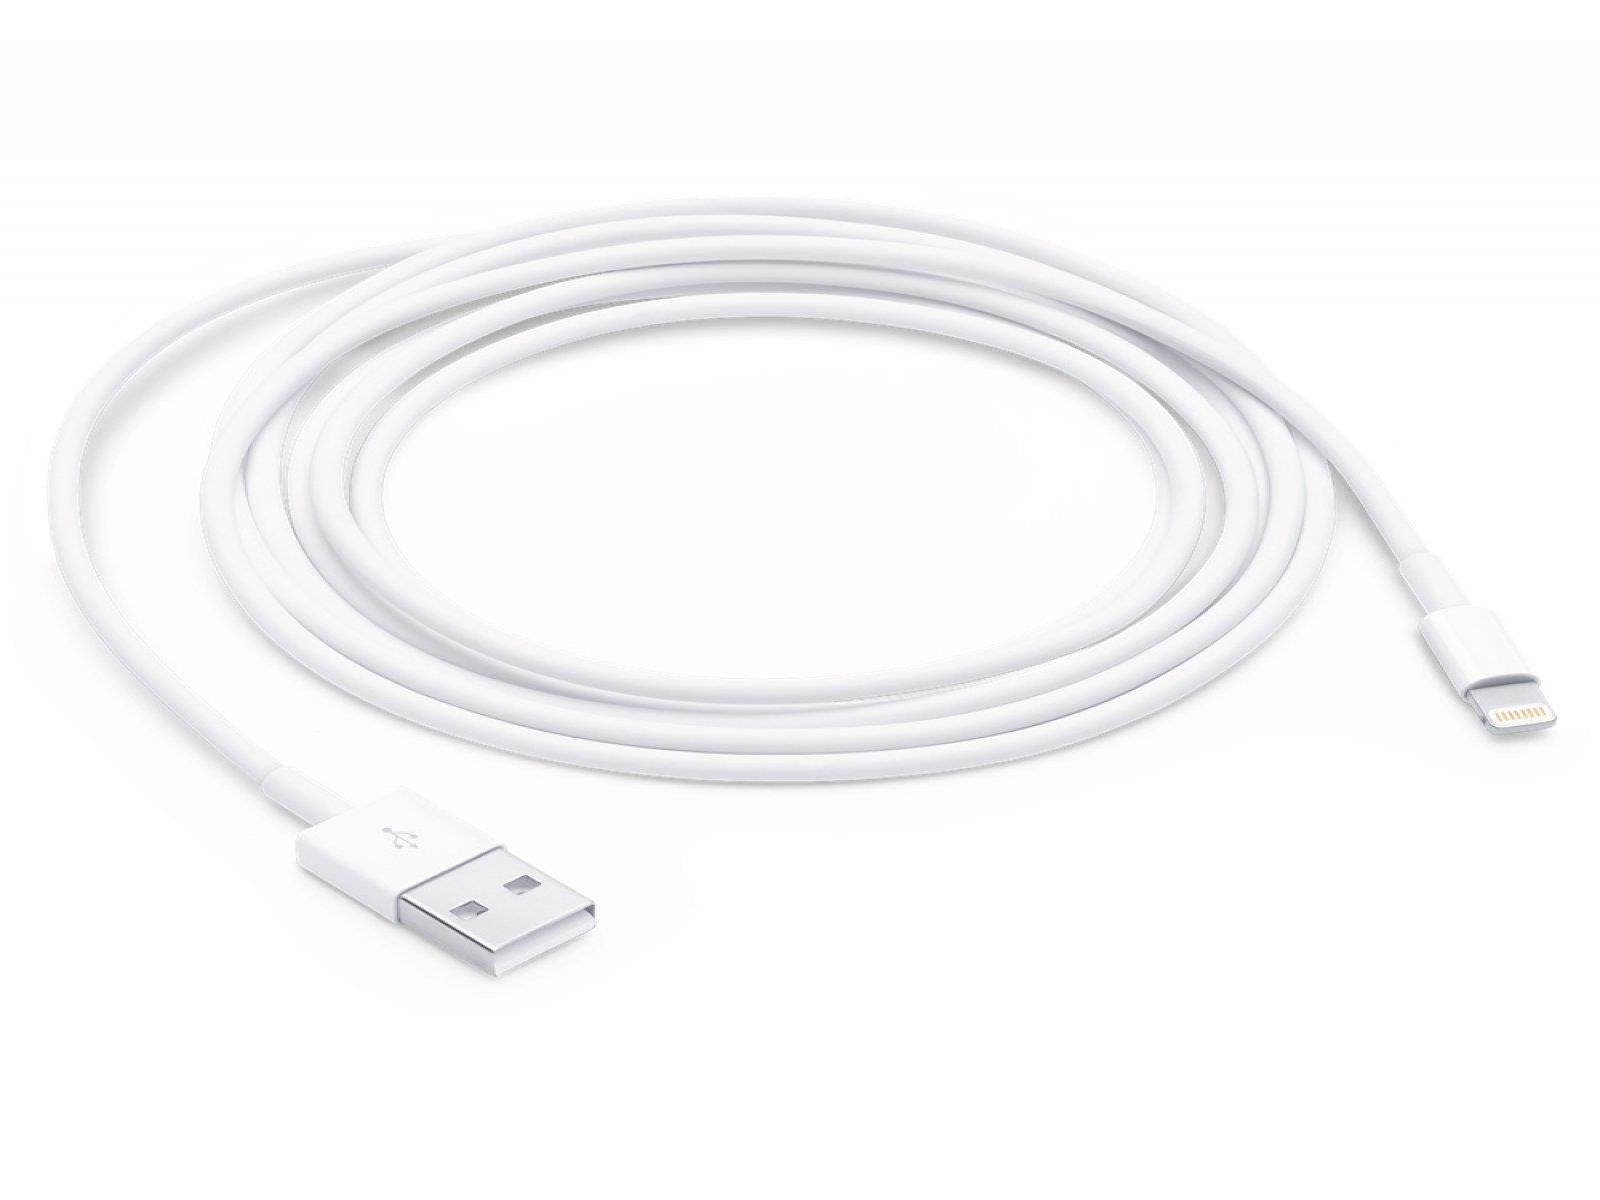 Apple Lightning to USB 2.0 Cable (MFI Certified) MD819ZM/A | Headphones | apple cable, apple cable for charger, iMac cable, iPhone cable, iPhone11, iPhone12, iPhone13, iPod cable, Lightning cable, Lightning to usb cable, usb 2.0, Usb cable, Usb to lightning | Apple